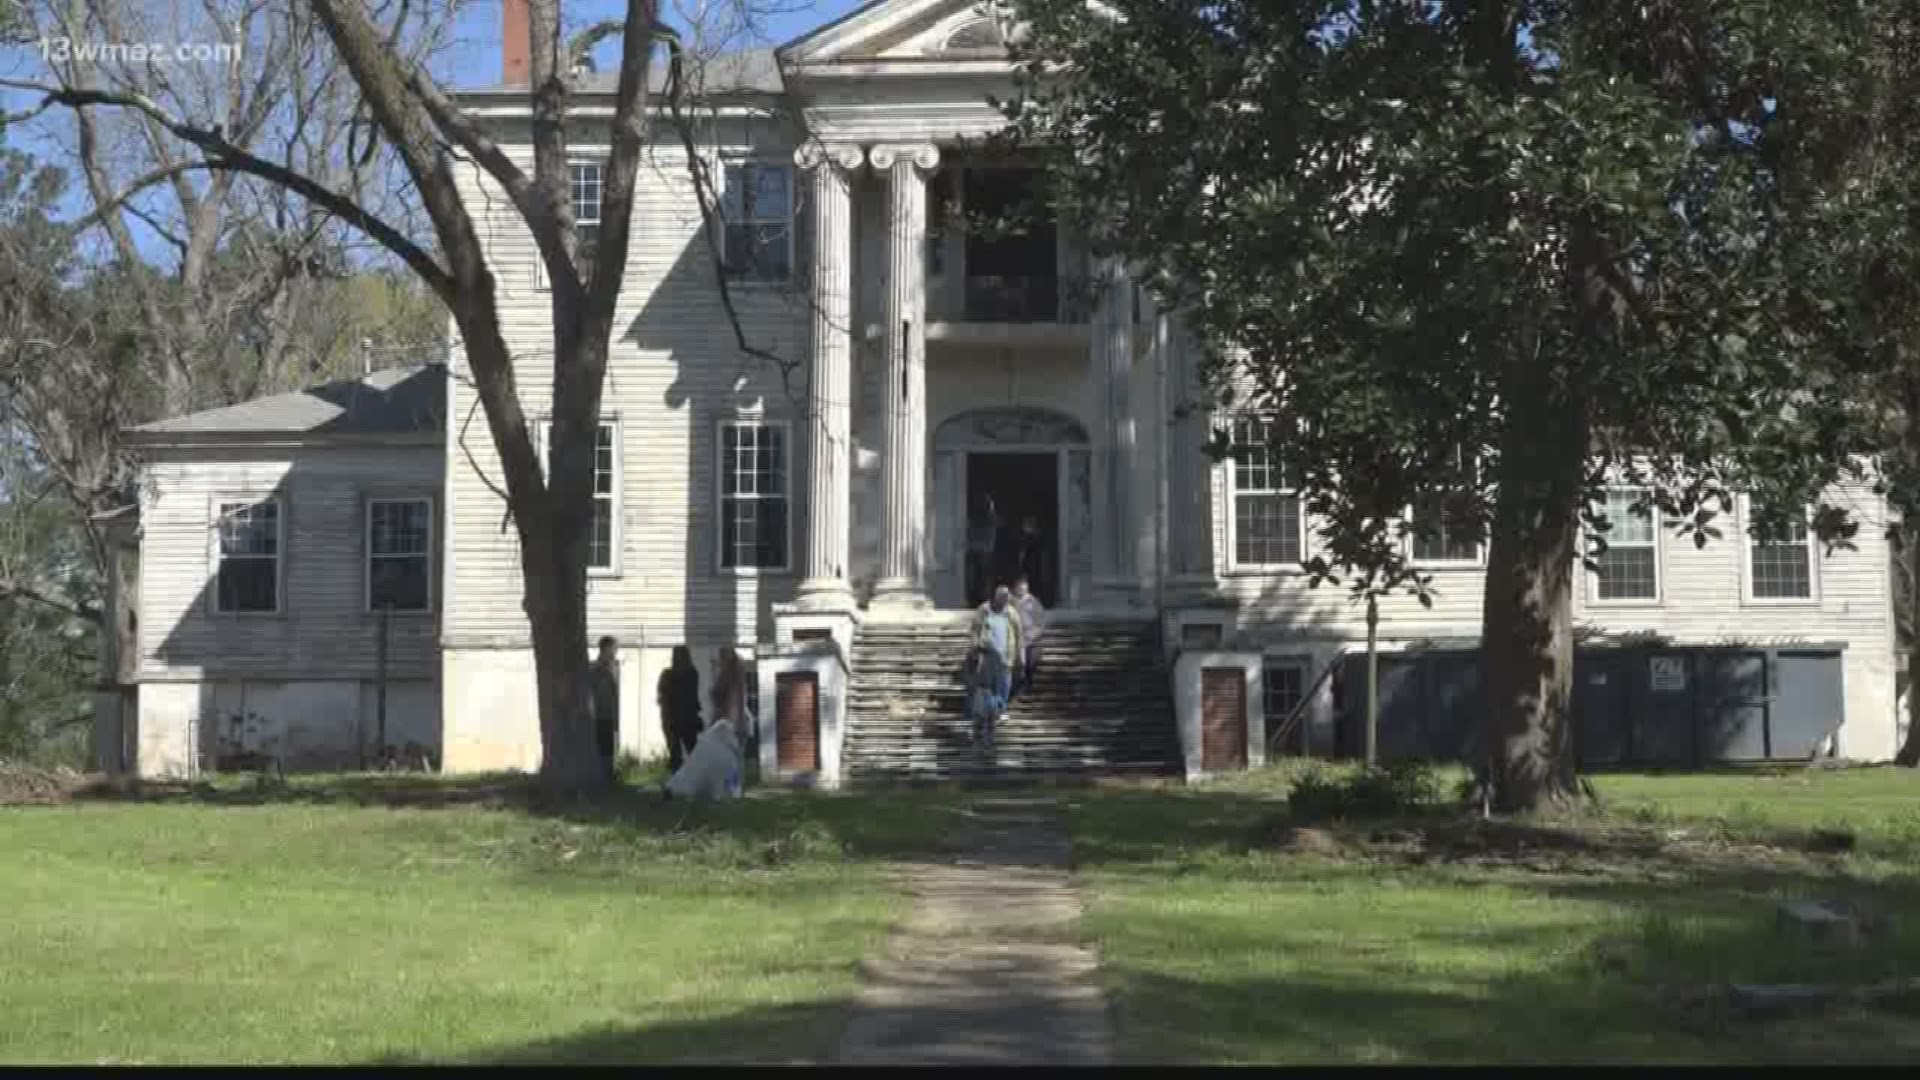 The Historic Rockwell House in Milledgeville is getting cleaned up and transformed into student housing. Volunteers met on Saturday to help out with the effort.